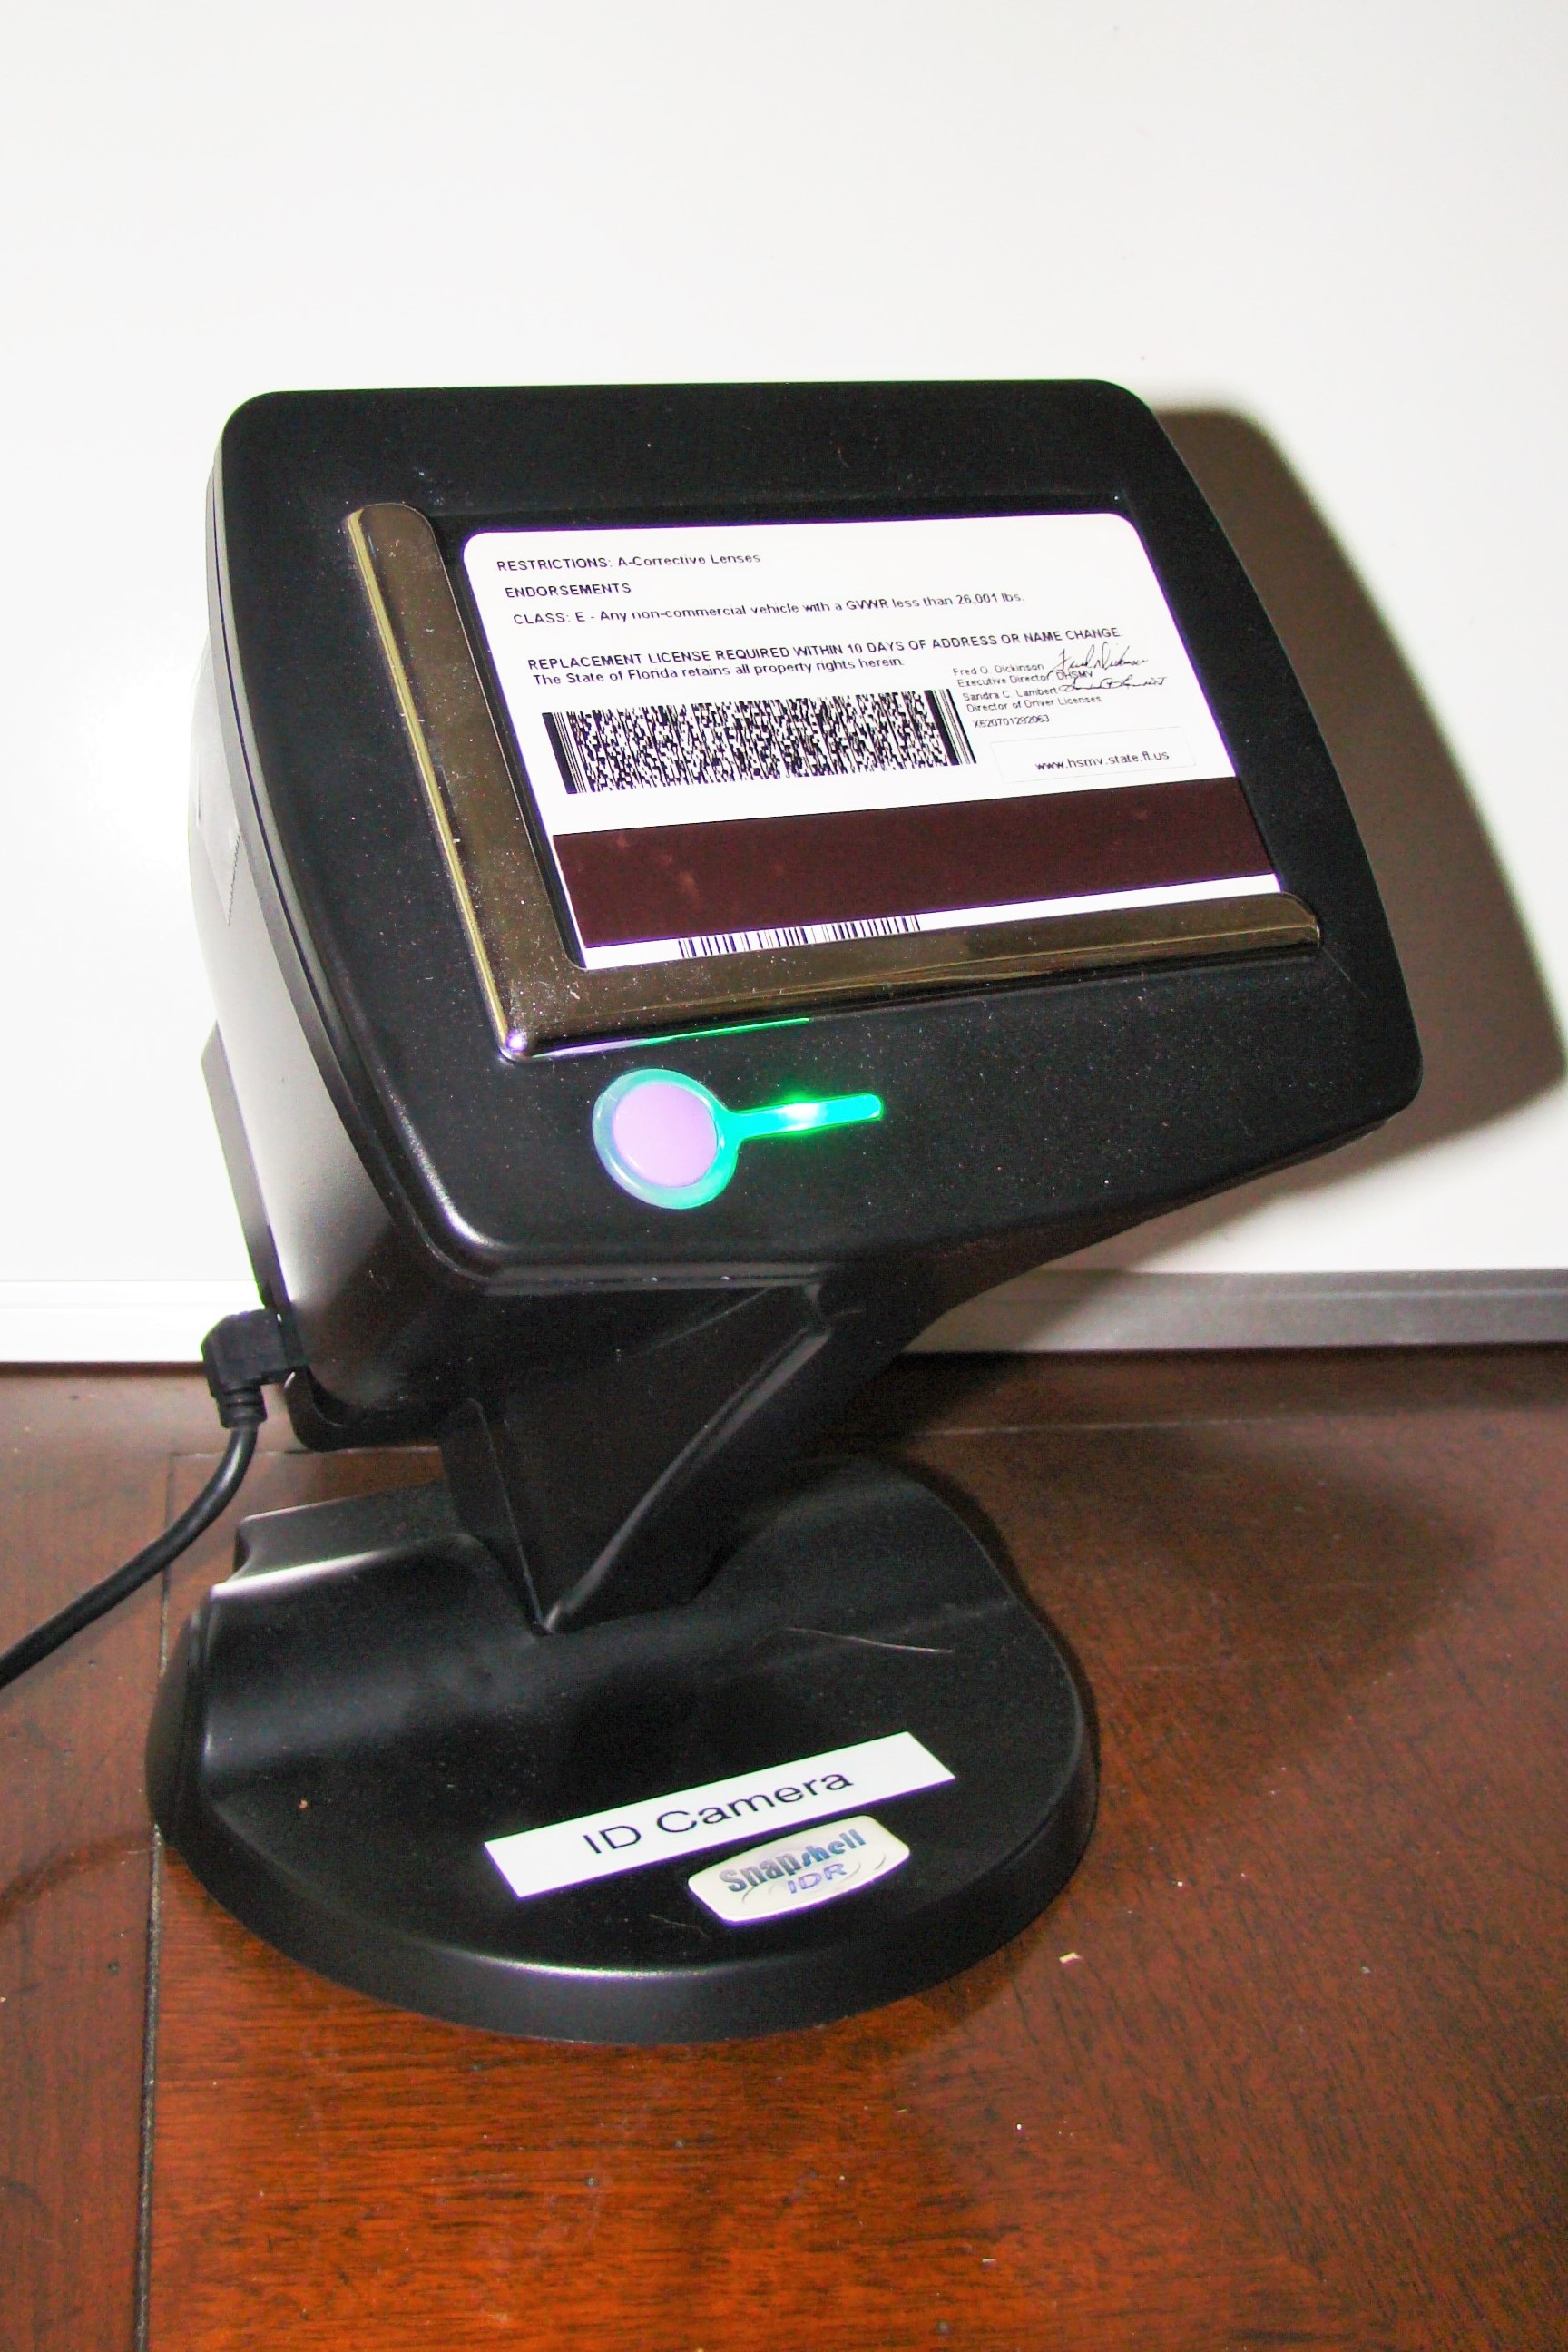 Drivers License Scanning | Southworth Solutions1728 x 2592